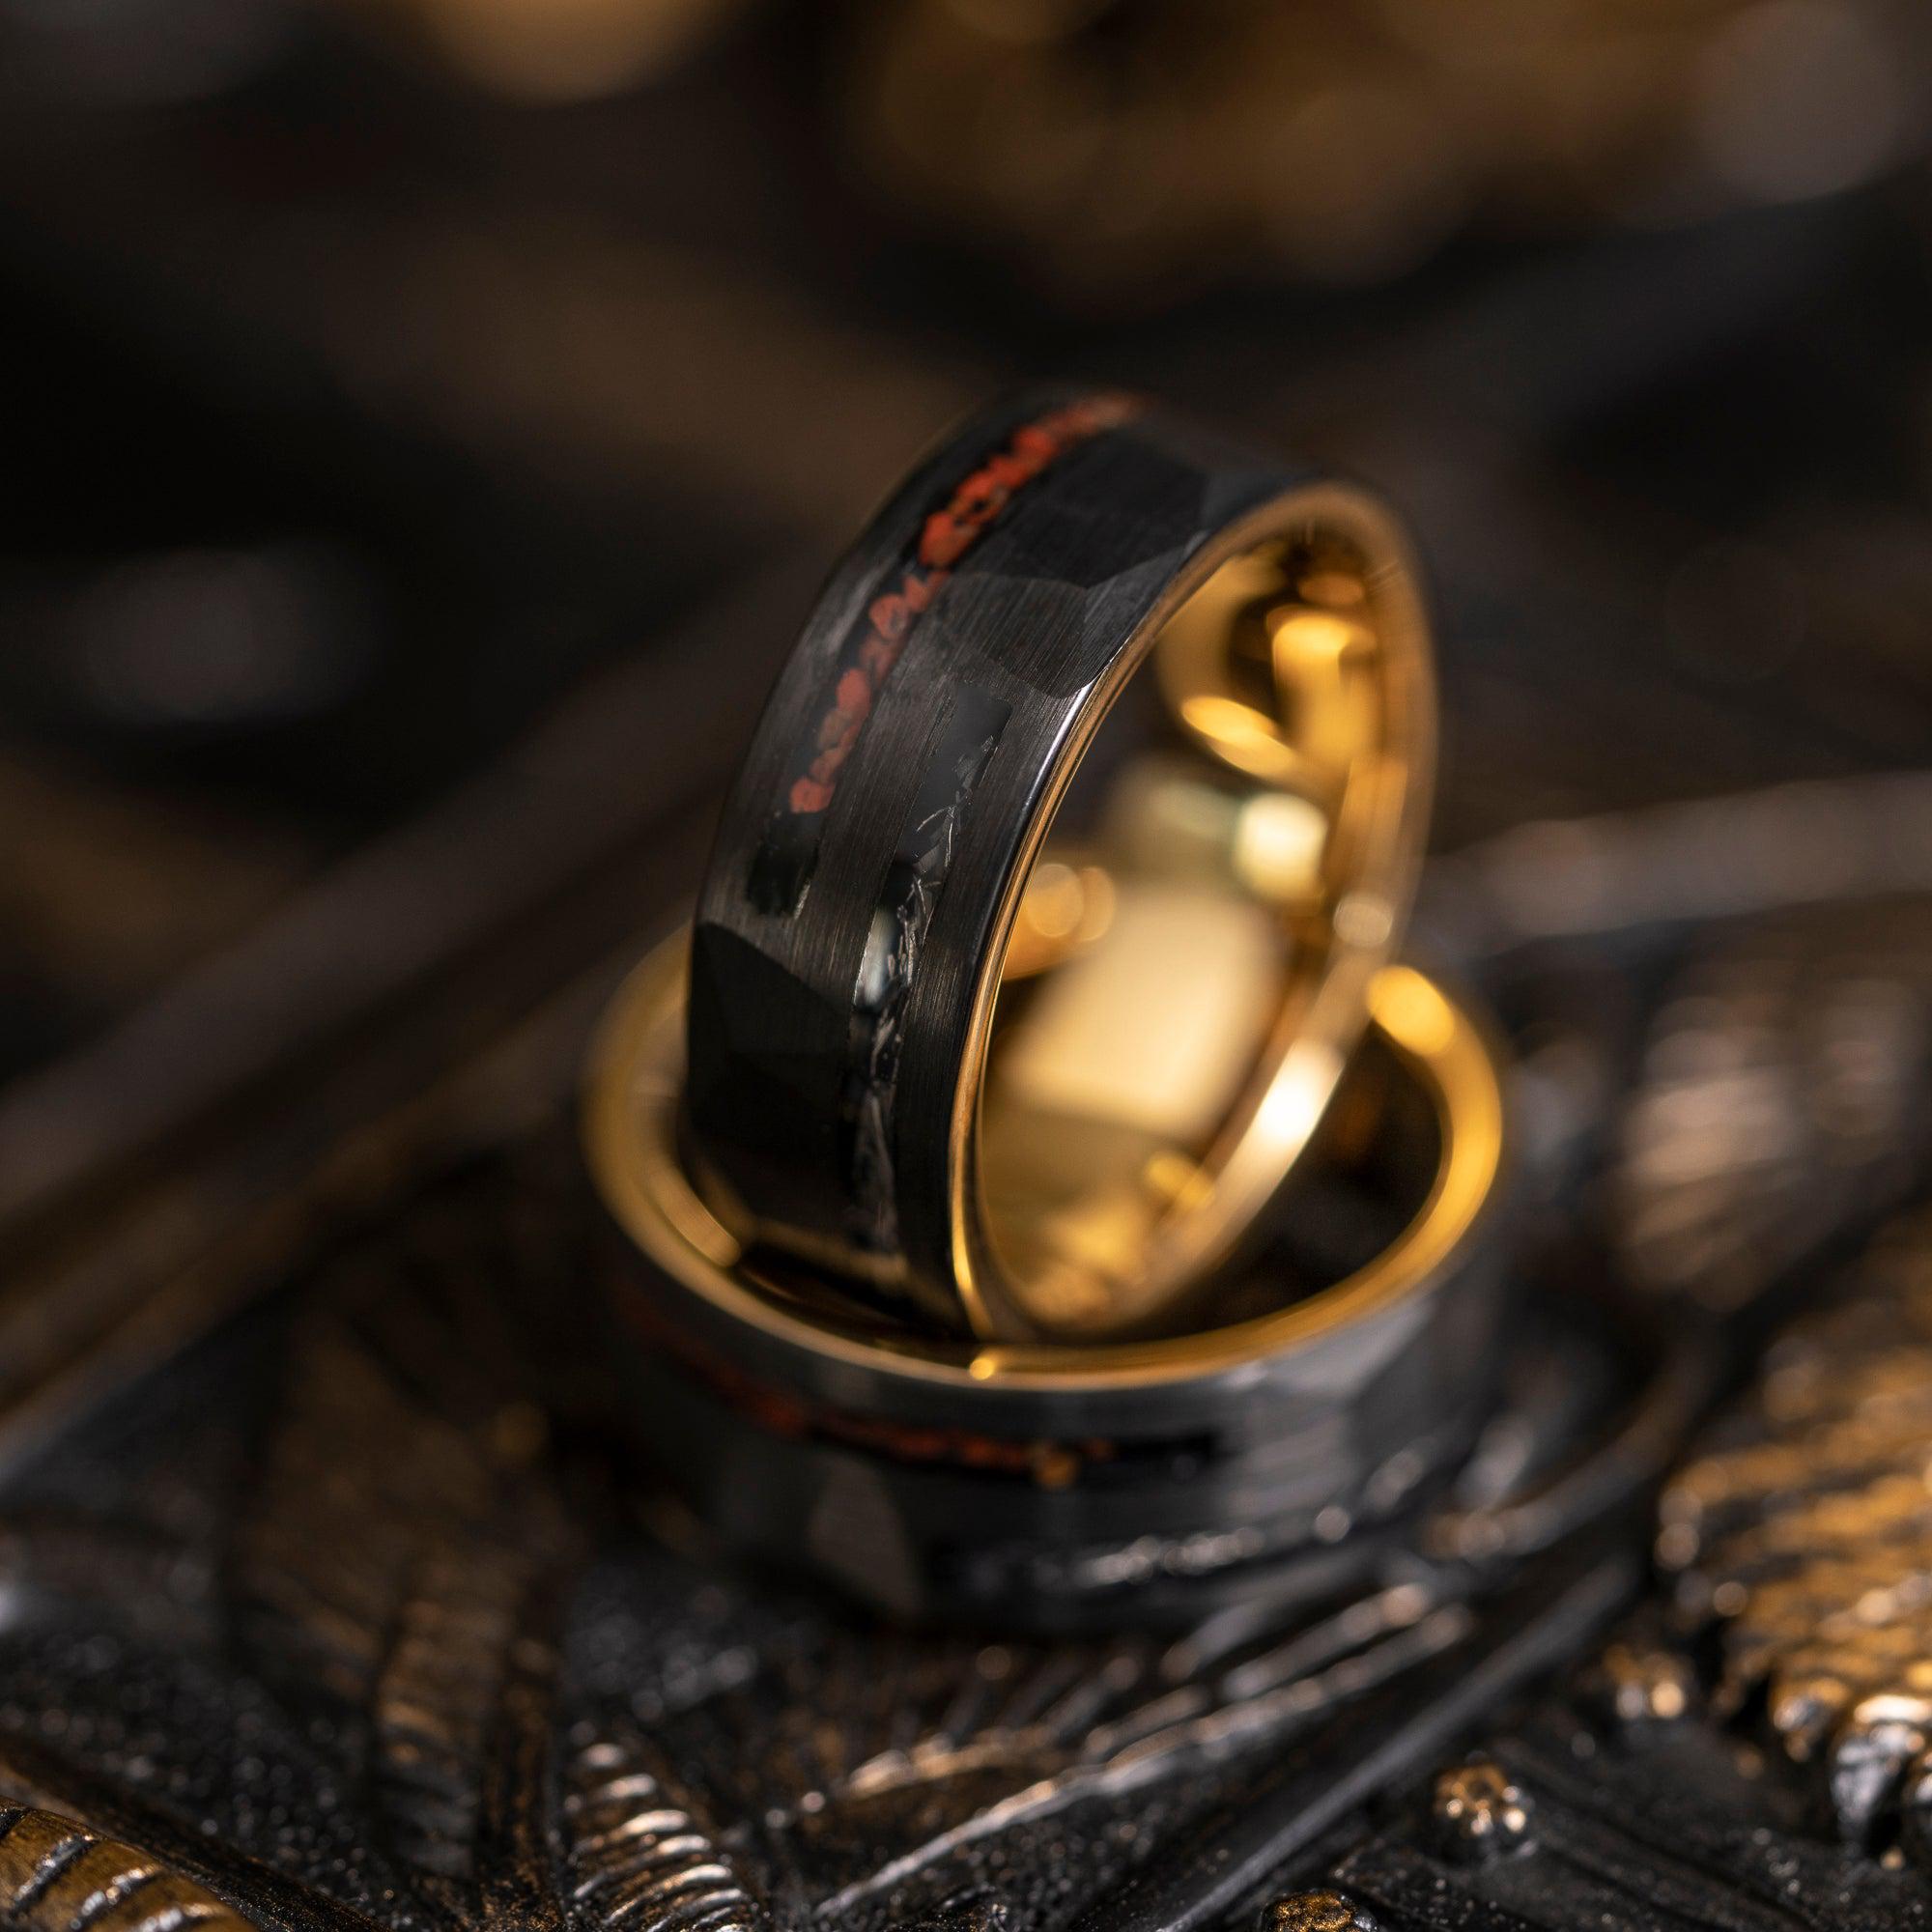 "Perseus" Black x Yellow Gold Hammered Tungsten Carbide Ring- Dinosaur and Meteorite- 8mm